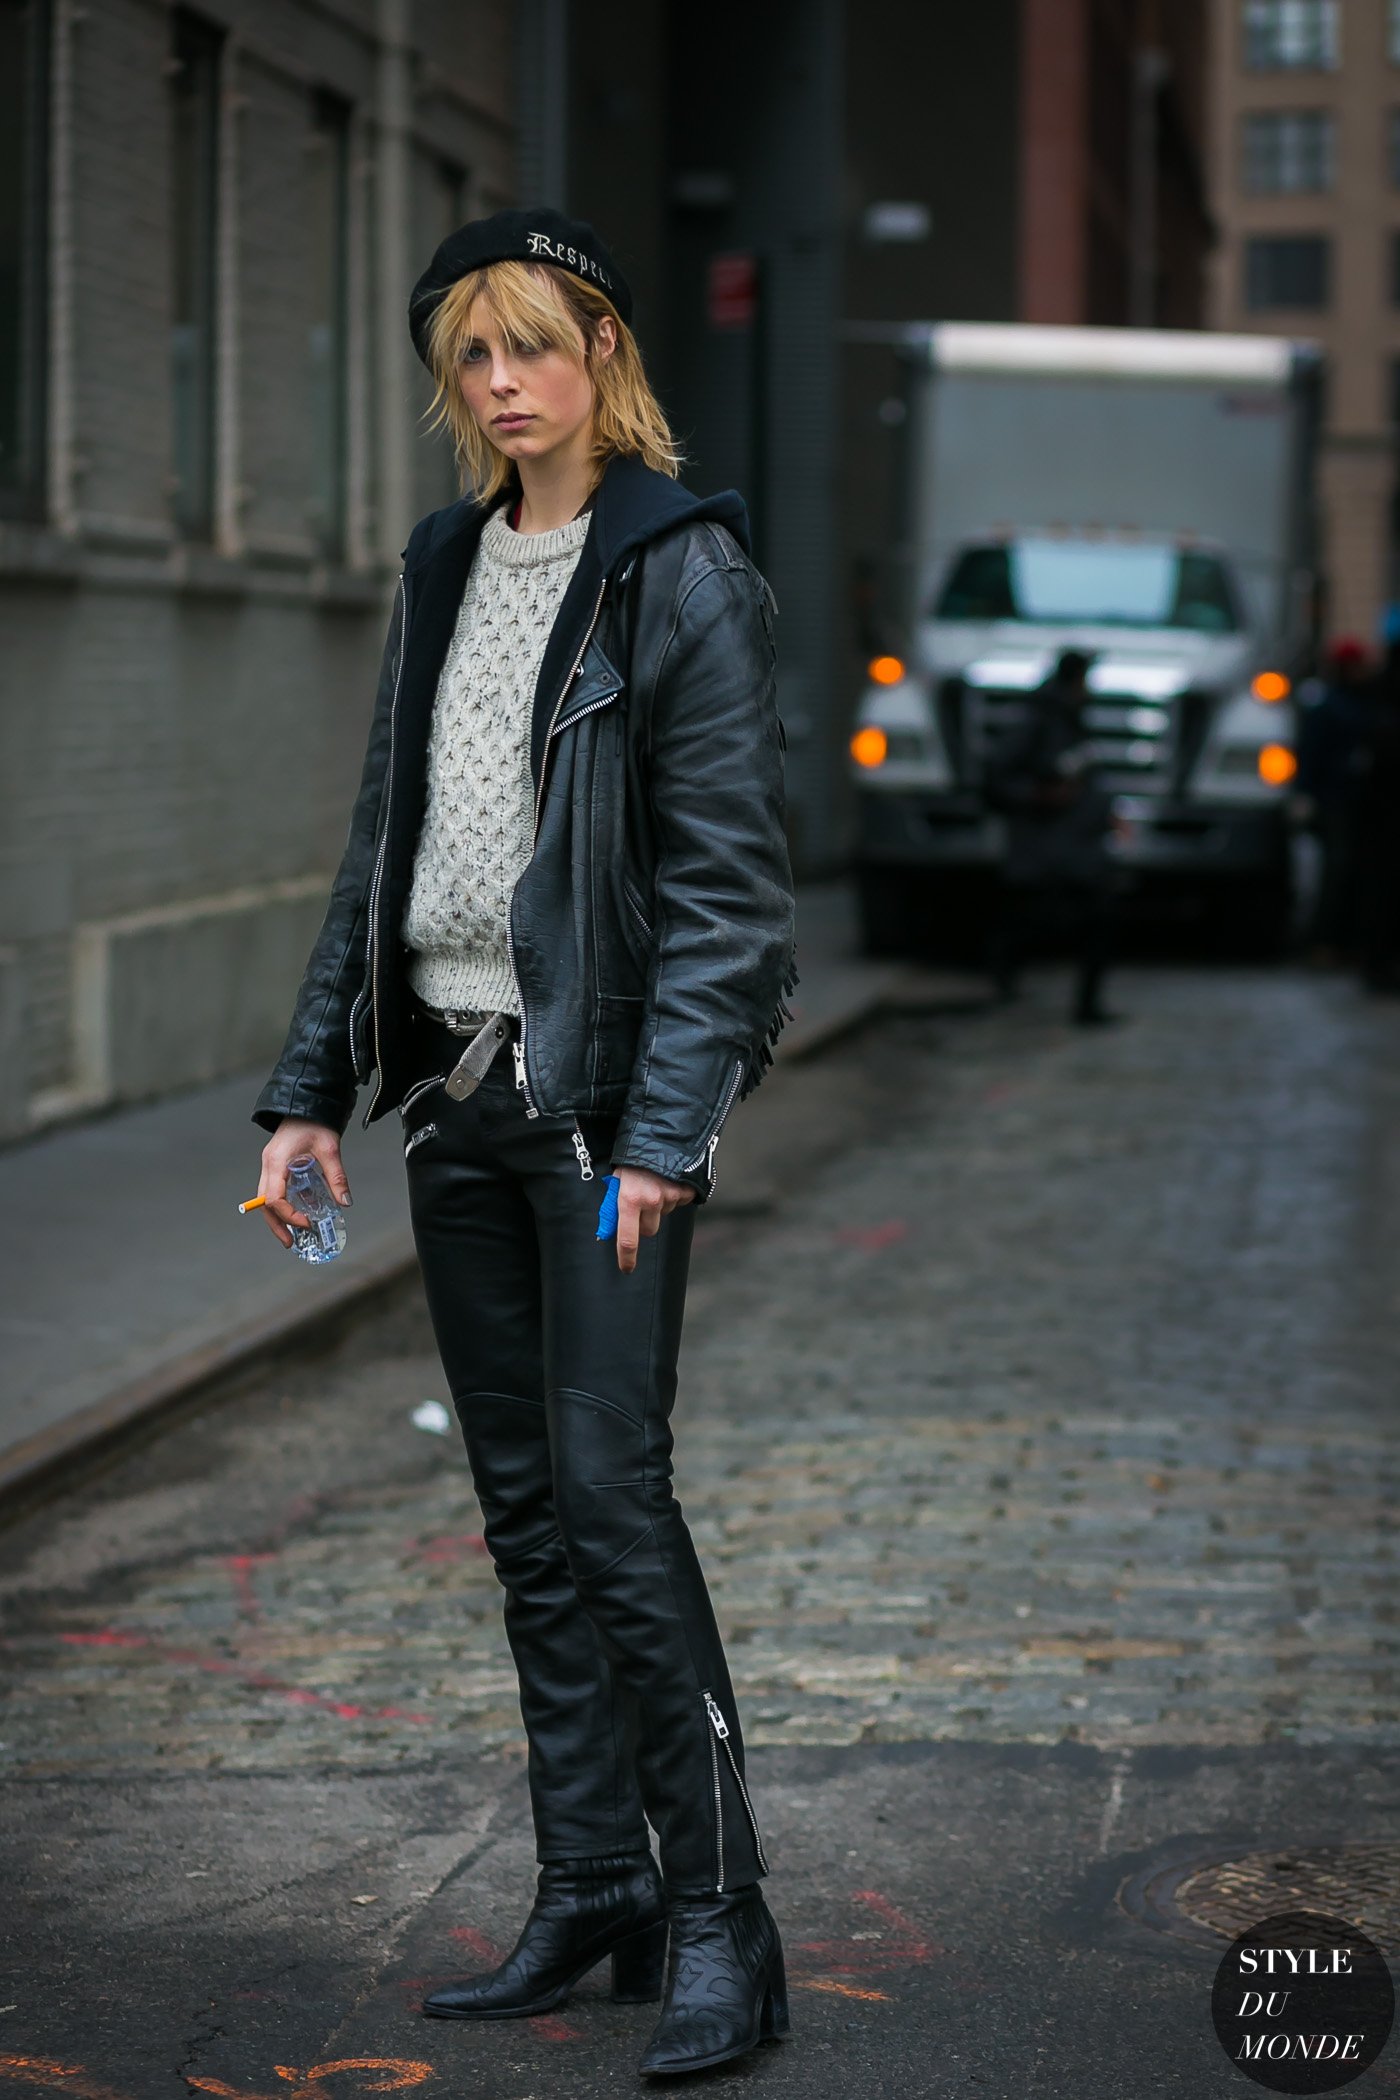 Edie-Campbell-by-STYLEDUMONDE-Street-Style-Fashion-Photography0E2A9620.jpg